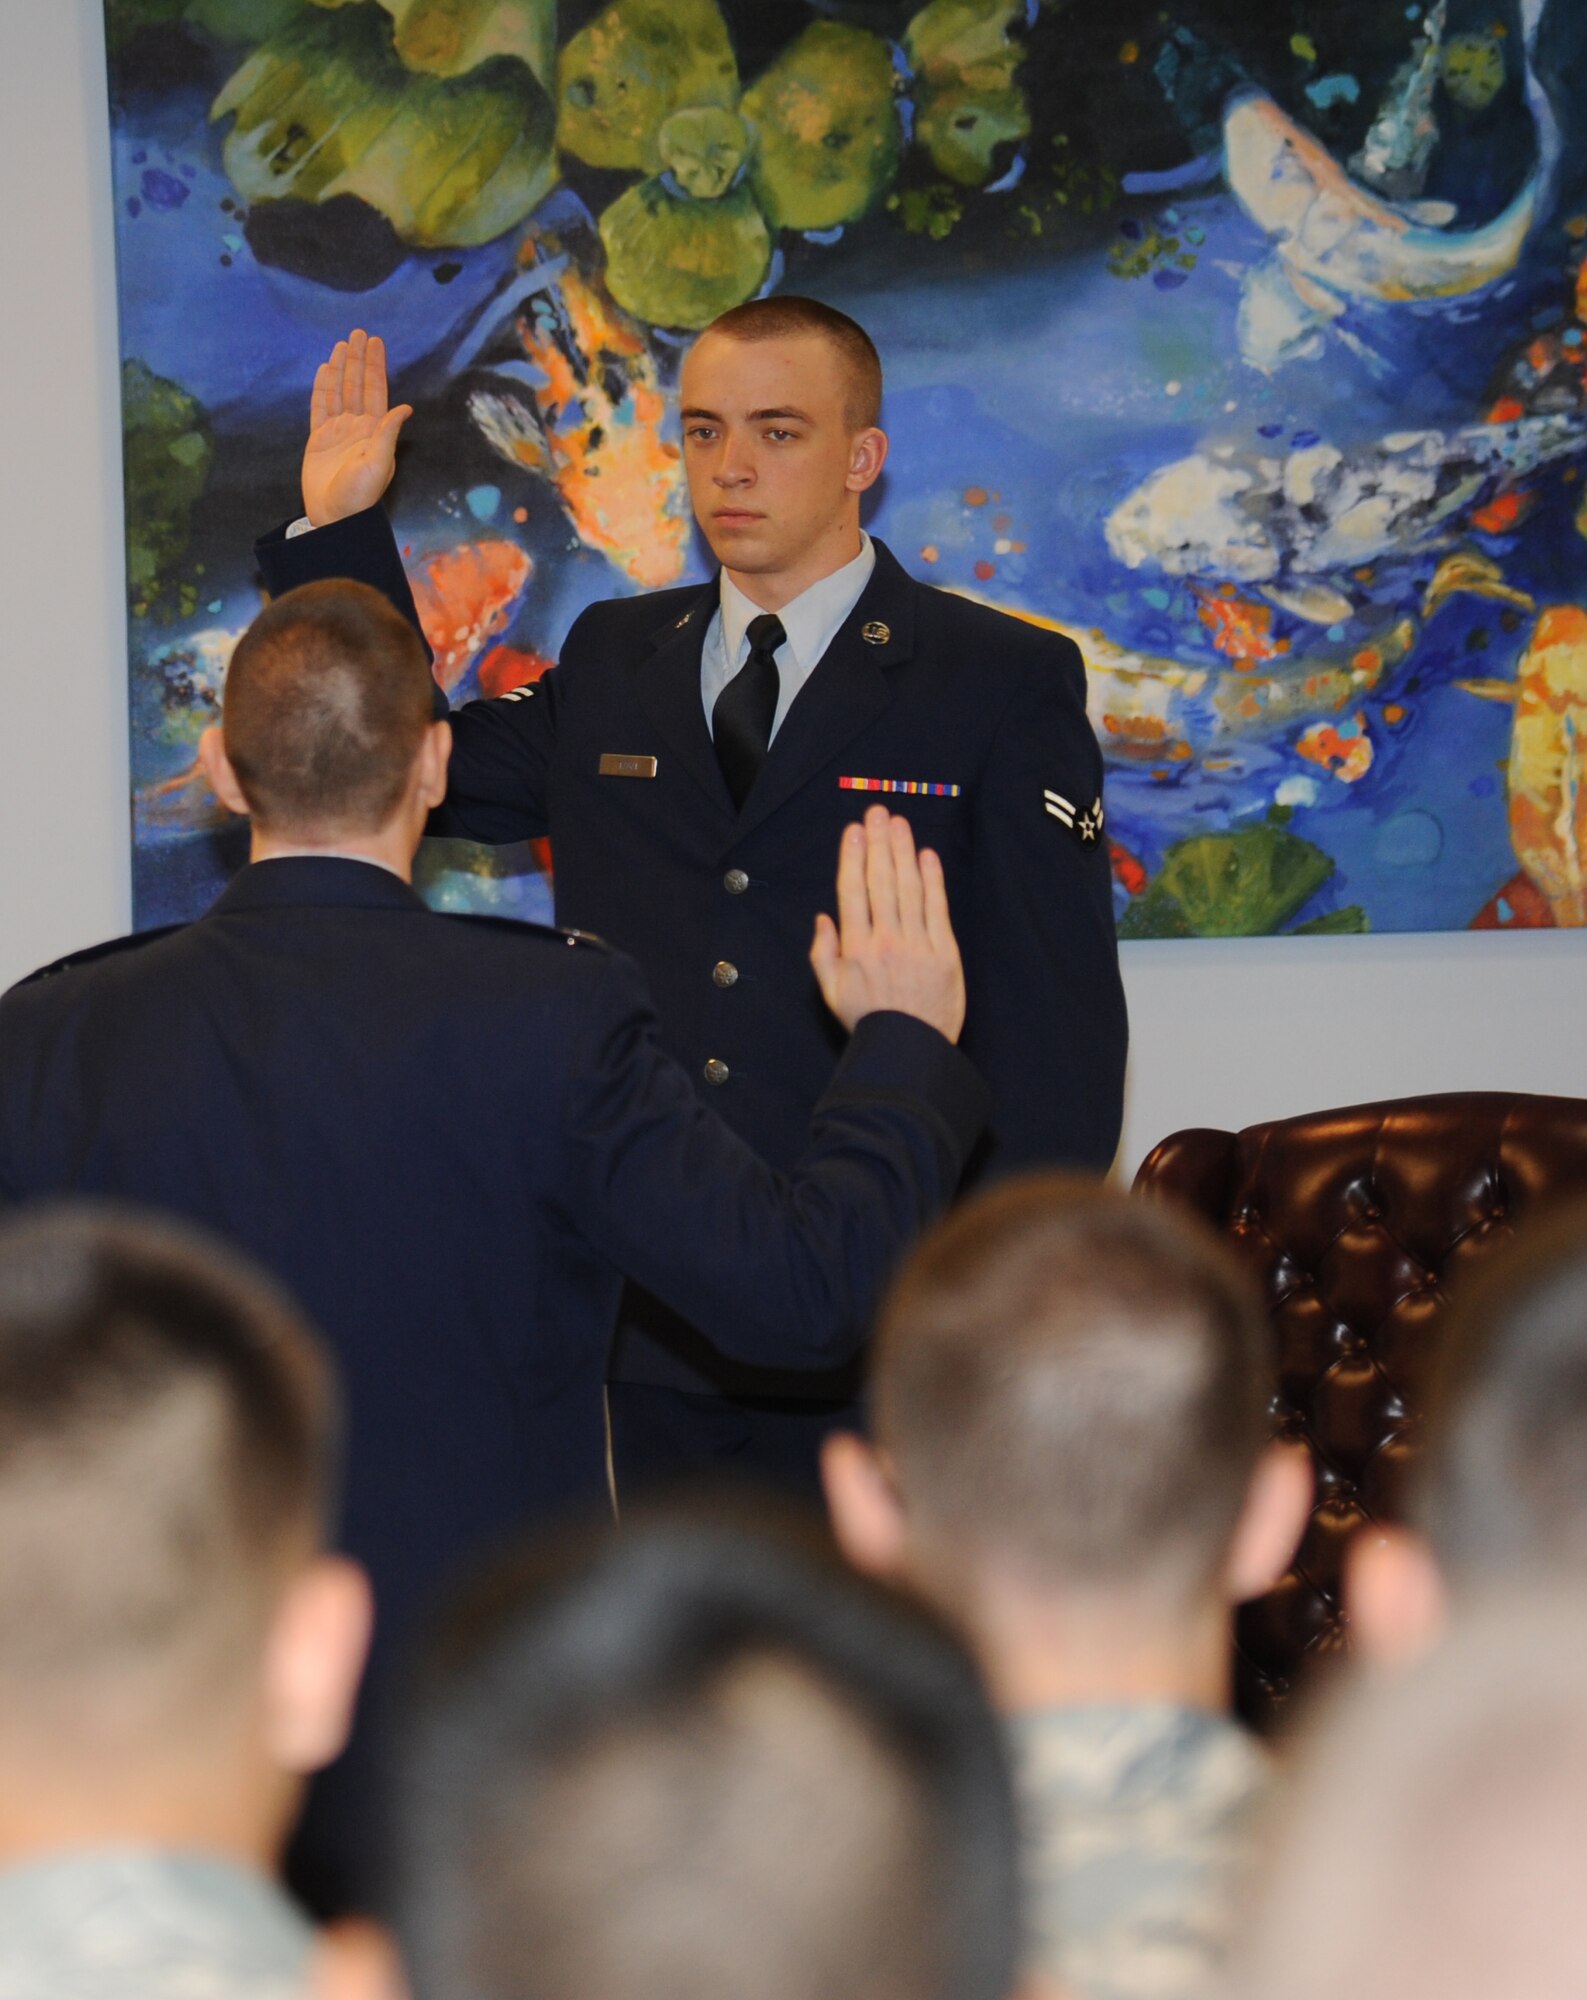 Capt. Craig Dunham, 81st Training Wing assistant staff judge advocate, swears in Airman 1st Class Zachary Tagai, 334th Training Squadron, during a summary court martial Feb. 8, 2013, at the Levitow Training Support Facility, Keesler Air Force Base, Miss.  Dunham was the prosecutor and Tagai was a witness in the trial. Mobile summary courts martial set an example for new Airmen about consequences of their actions by quickly imposing good order and discipline.  (U.S. Air Force photo by Kemberly Groue)